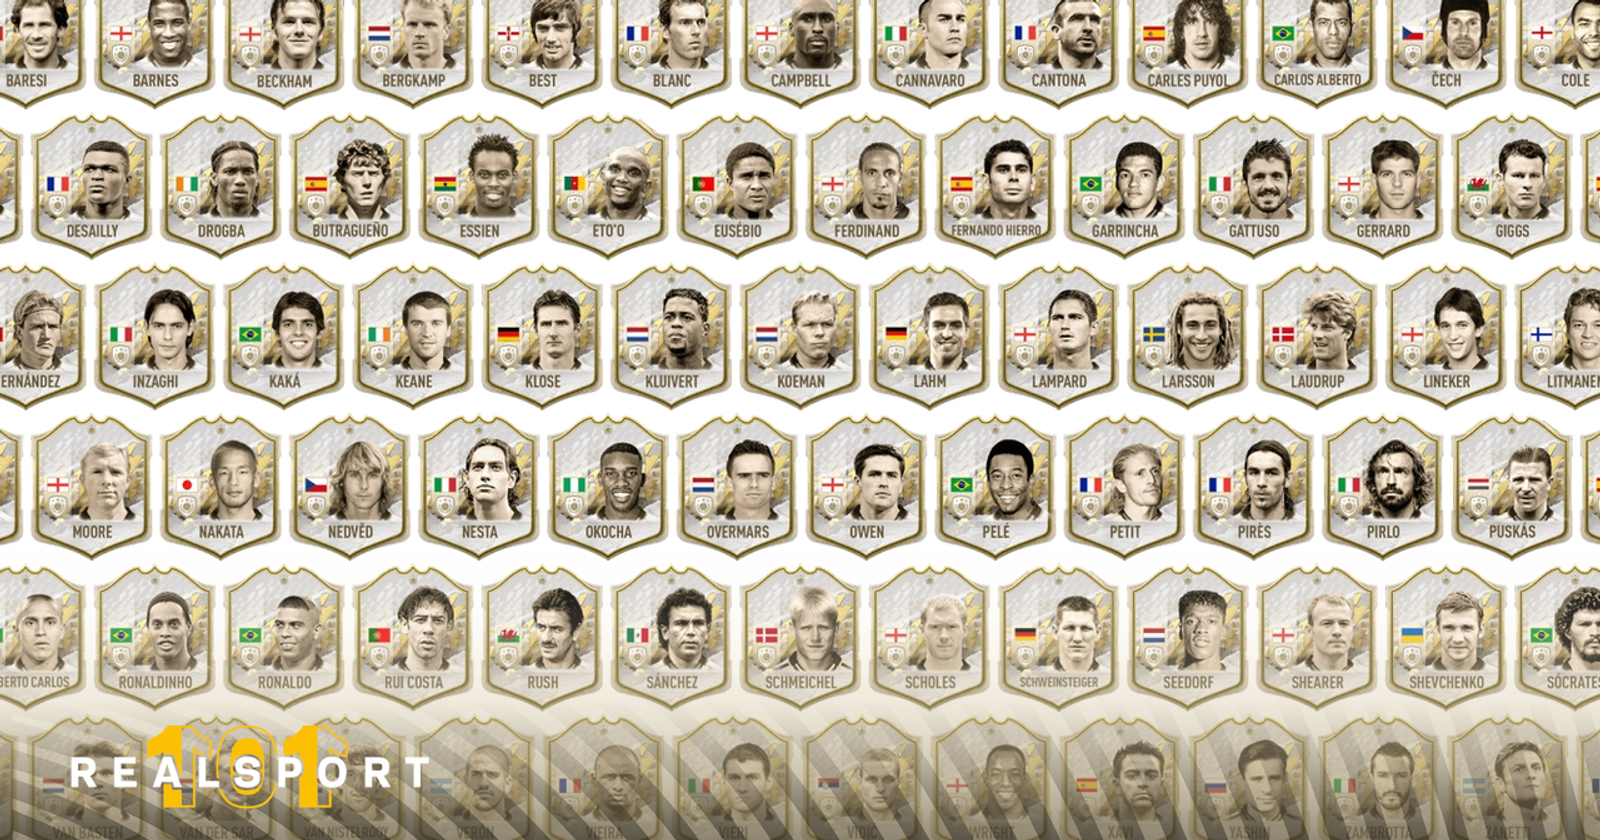 FUT ICONs - FIFA 23 Ultimate Team™ - Official Site